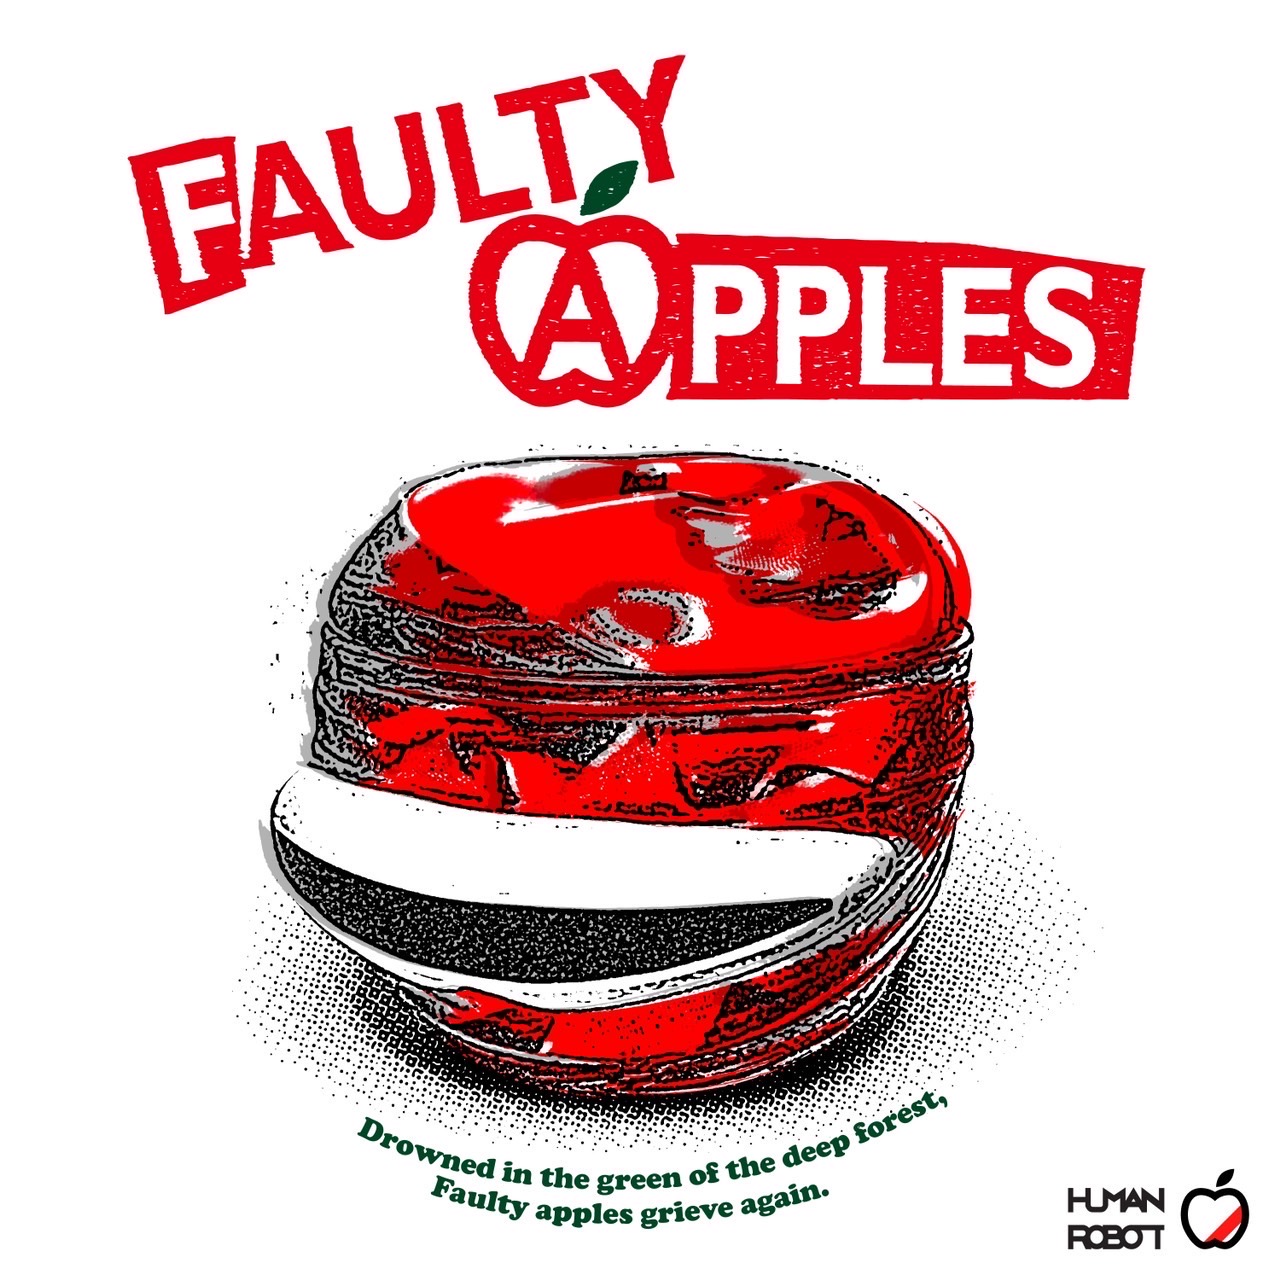 「FAULTY APPLES」